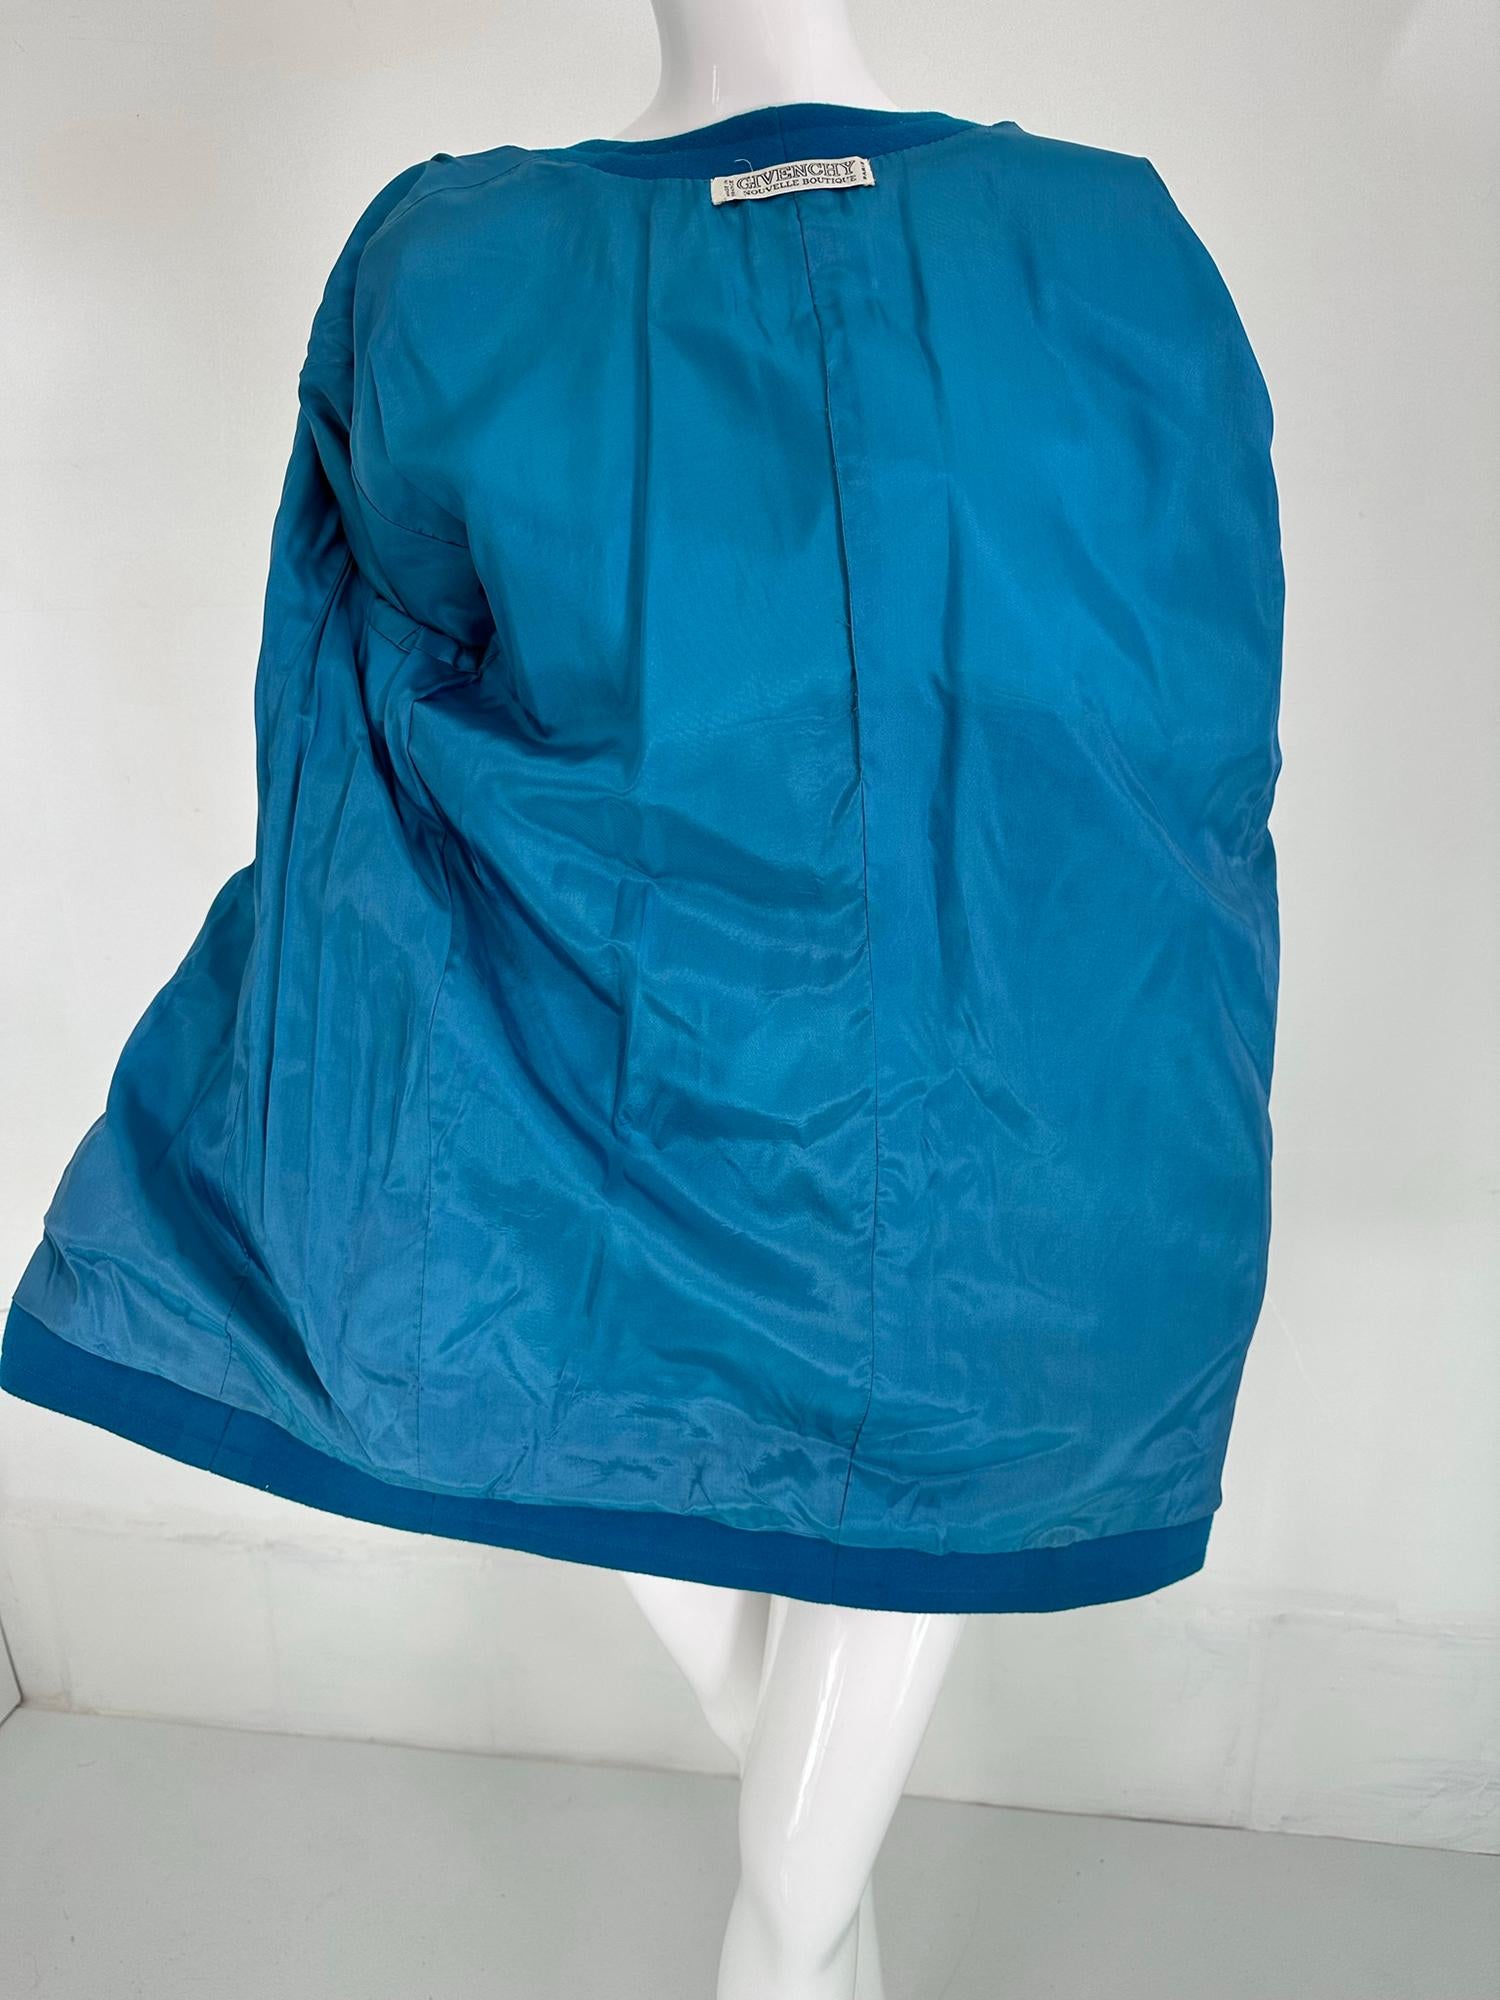 Givenchy Turquoise Wool Open Front Swing Coat with Angled Pockets 1980s For Sale 5